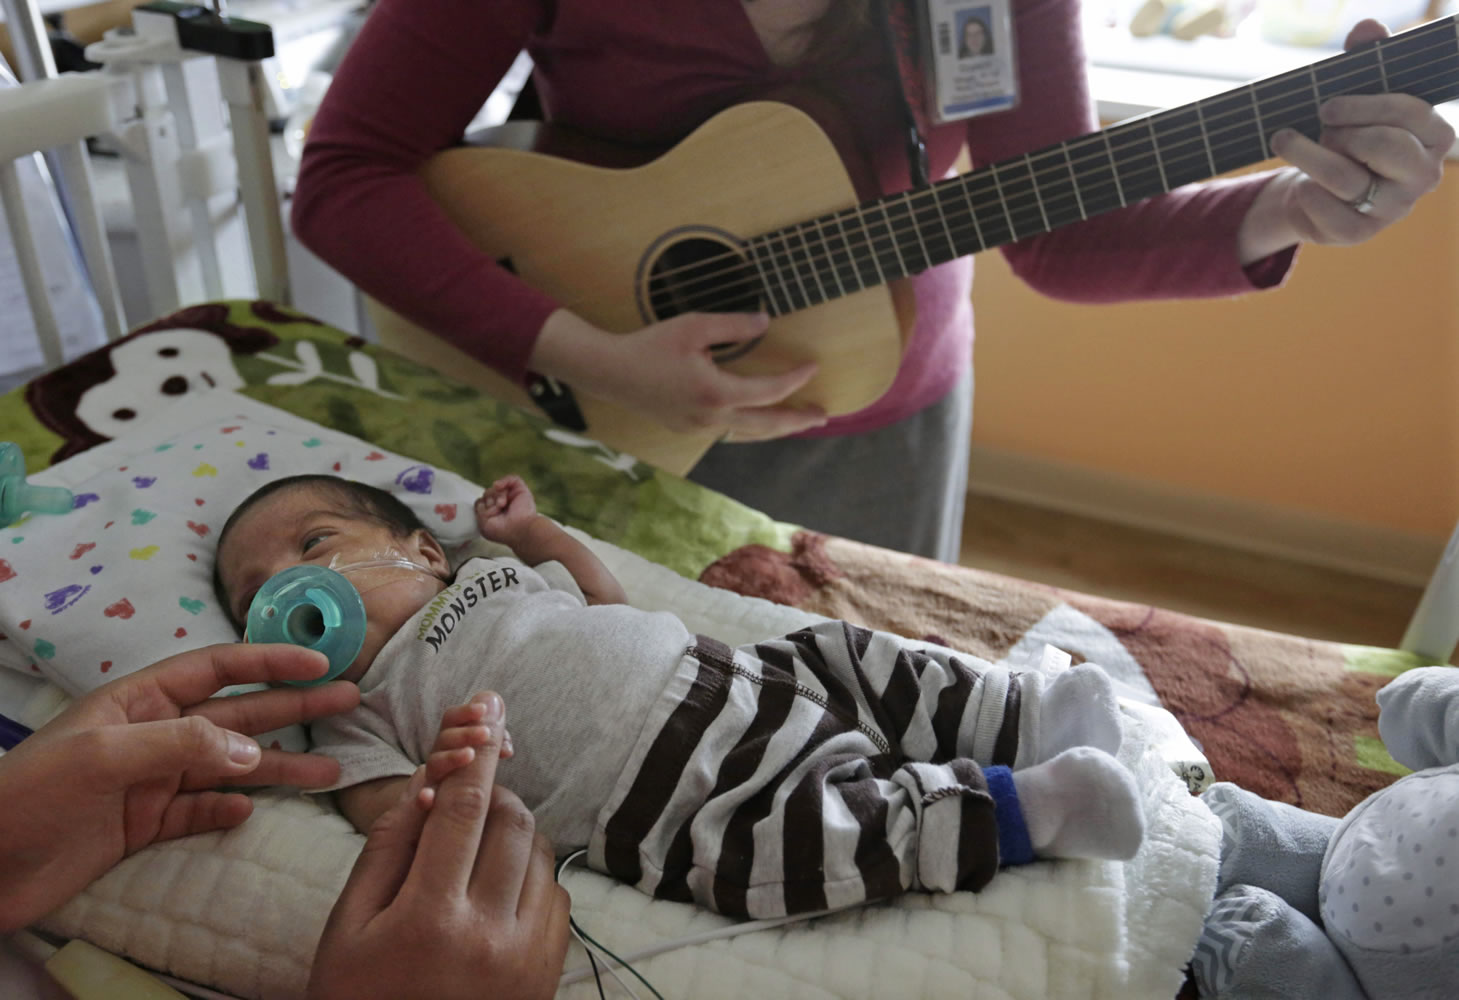 Music therapist Elizabeth Klinger, right, quietly plays guitar and sings for Augustin as he grips the hand of his mother, Lucy Morales, in the newborn intensive care unit at Ann &amp; Robert H. Lurie Children's Hospital in Chicago on May 6. Research suggests that music may help those born way too soon adapt to life outside the womb.